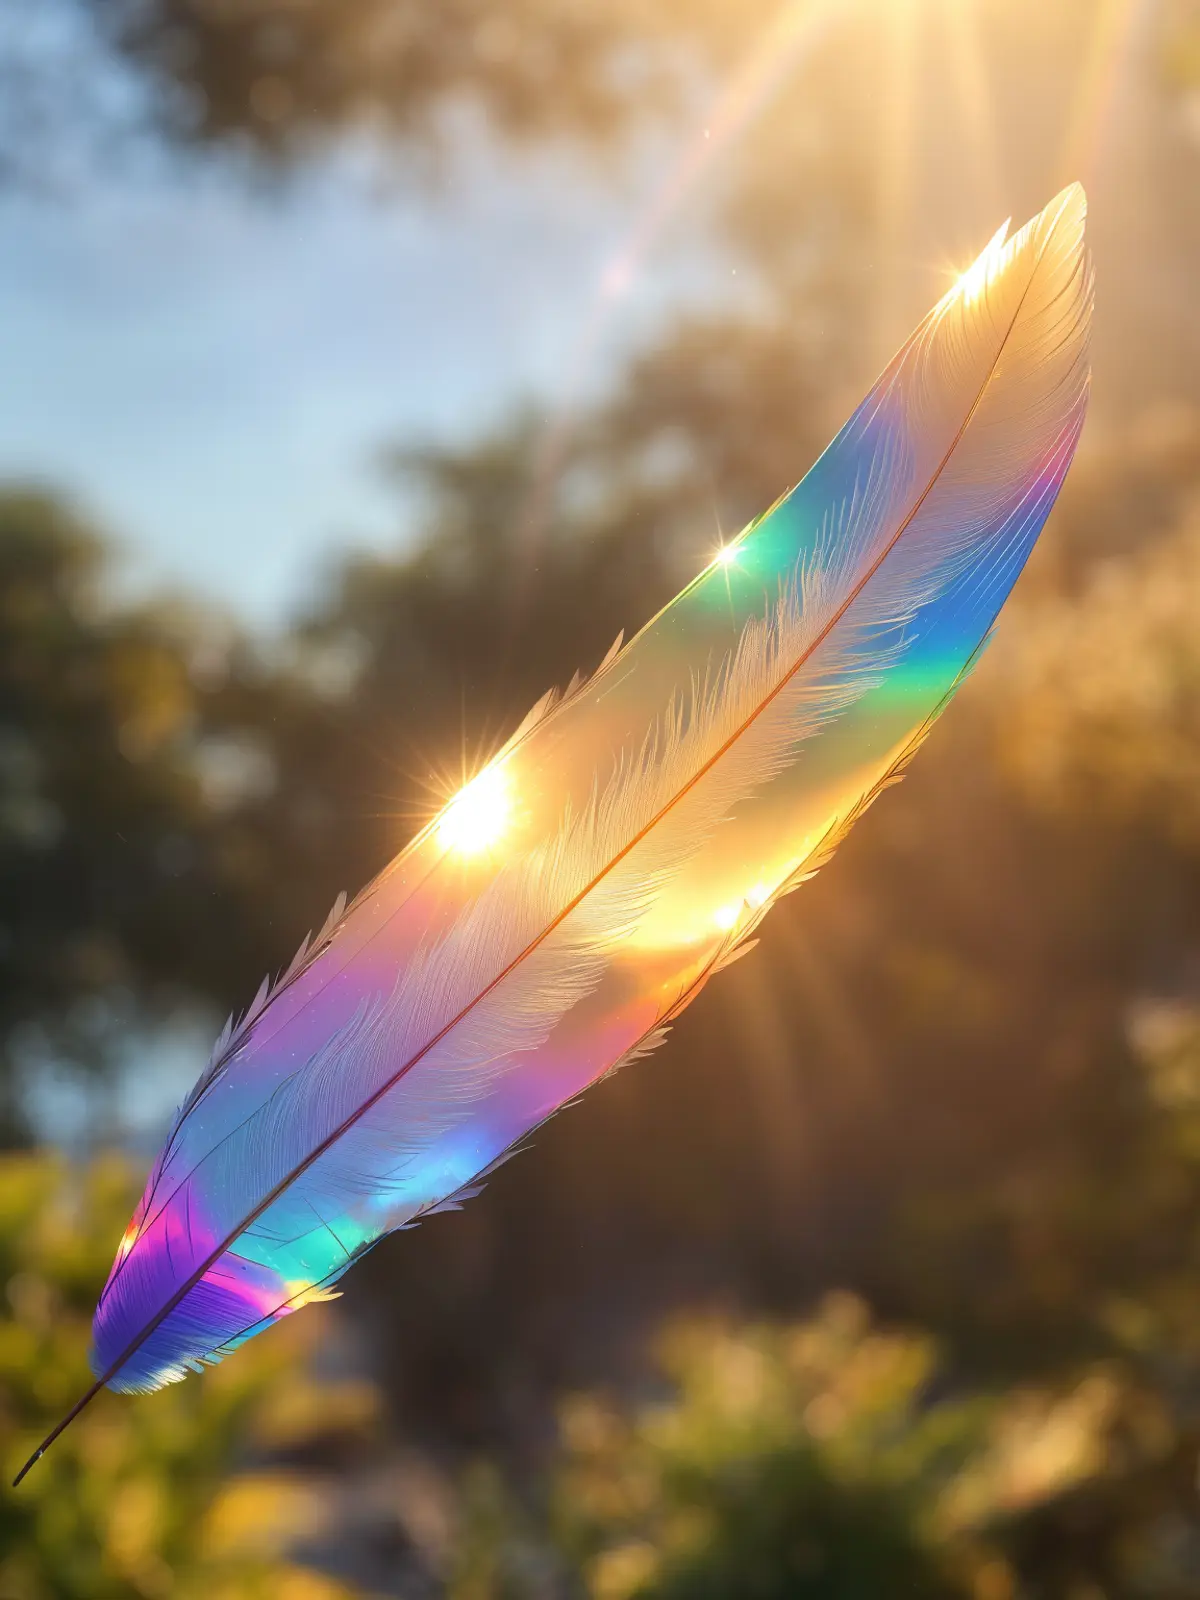 A single feather caught in a gentle breeze against a backdrop of soft-focus greenery and sunlight. The feather appears iridescent, with a spectrum of colors highlighted by the sun’s rays peeking through its delicate structure.